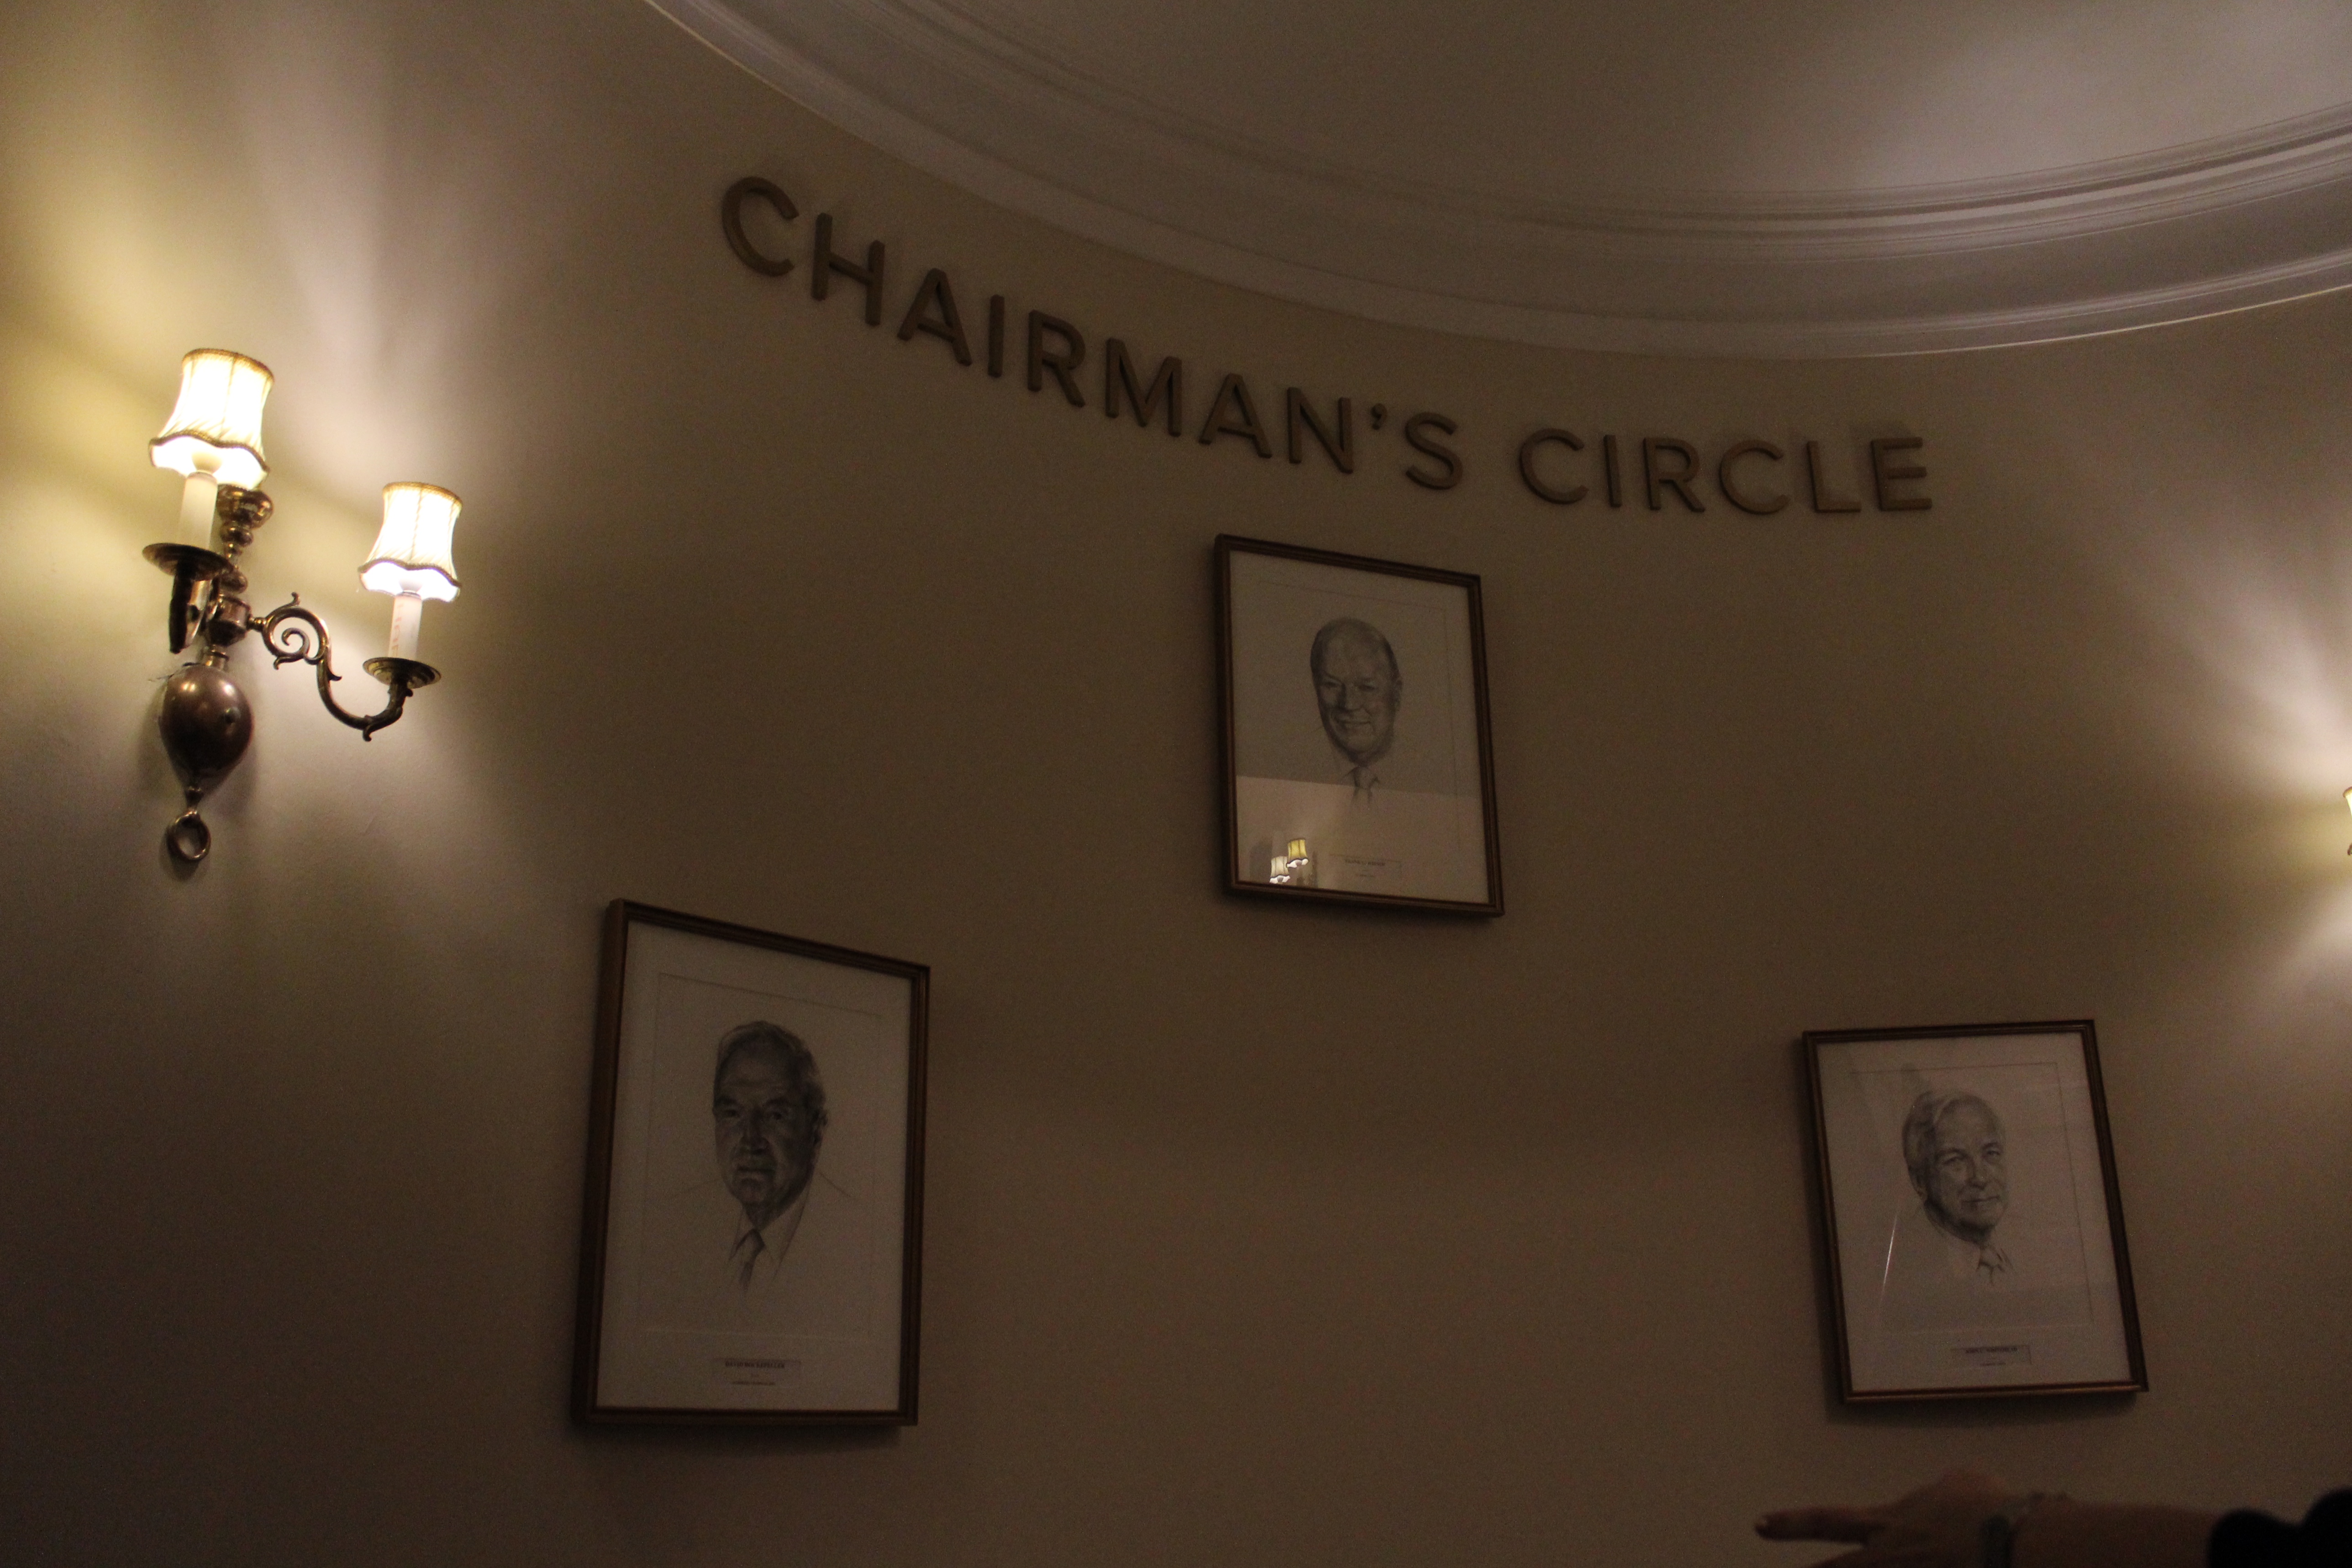 A sign reads "Chairman's Circle" with three portraits under it. 